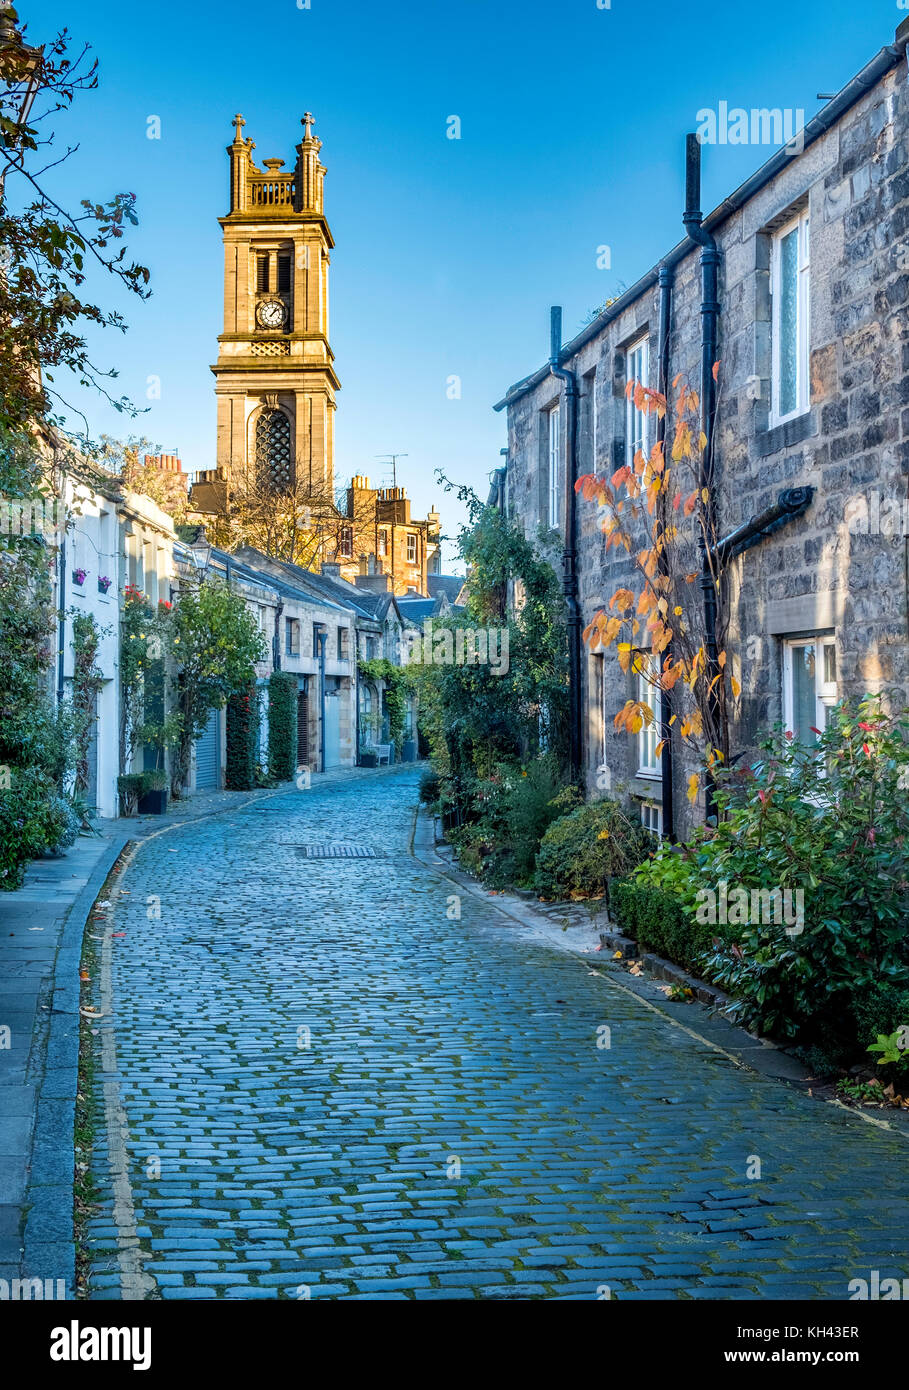 View along traditional row of mews houses towards St Stephen's Church  in Circus Lane in Stockbridge district of New Town in Edinburgh, Scotland, Unit Stock Photo